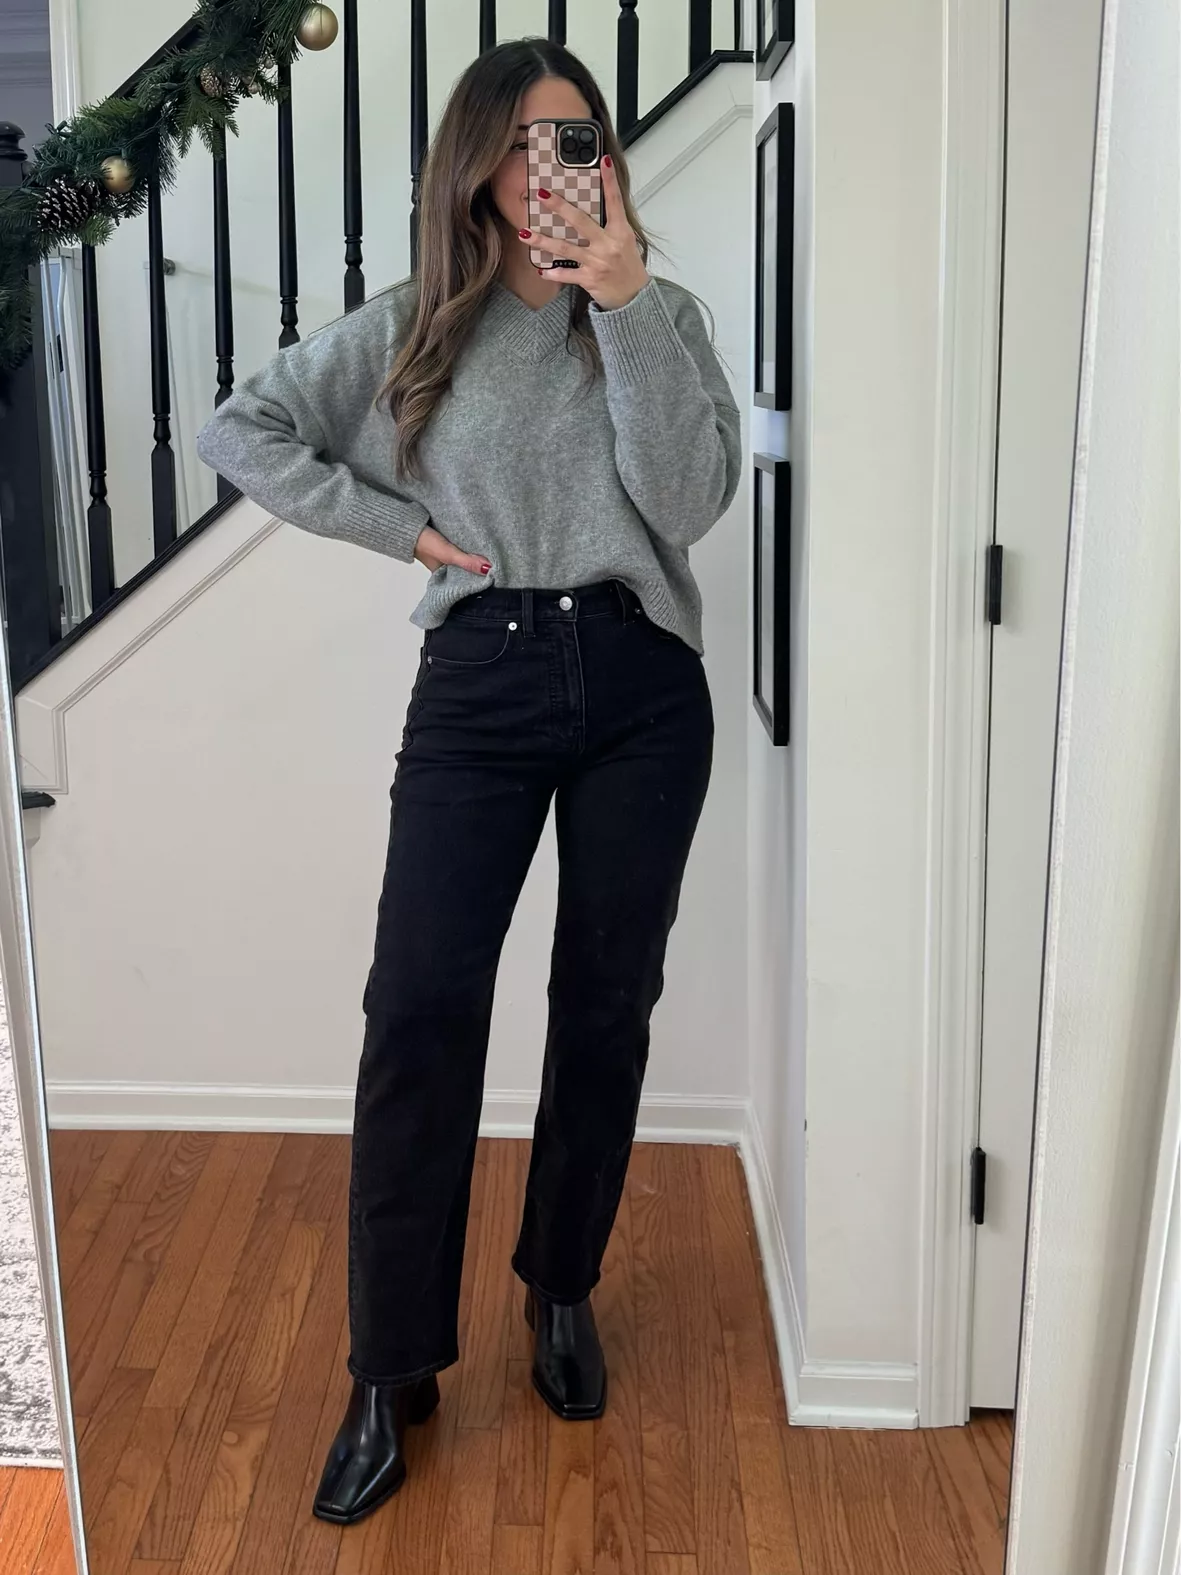 How I'm Styling Black Pants this Fall - M Loves M